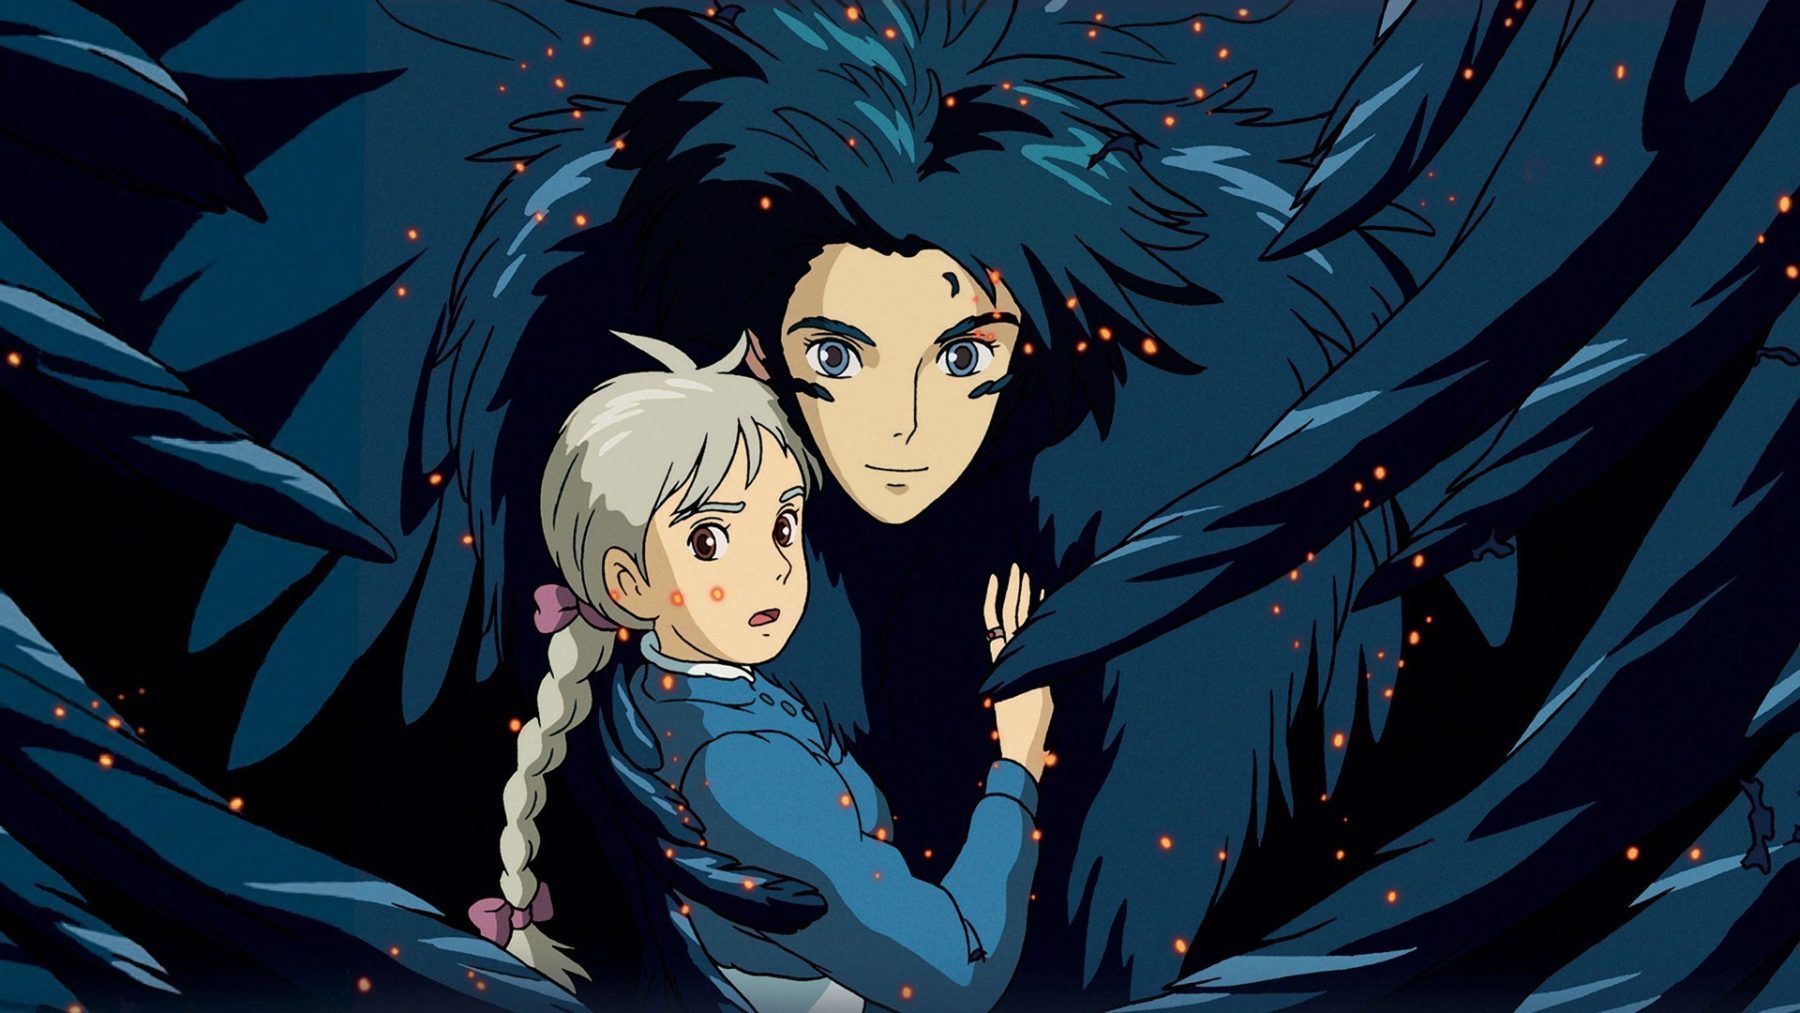 Dying to watch Studio Ghibli? Here's where you can watch all the movies